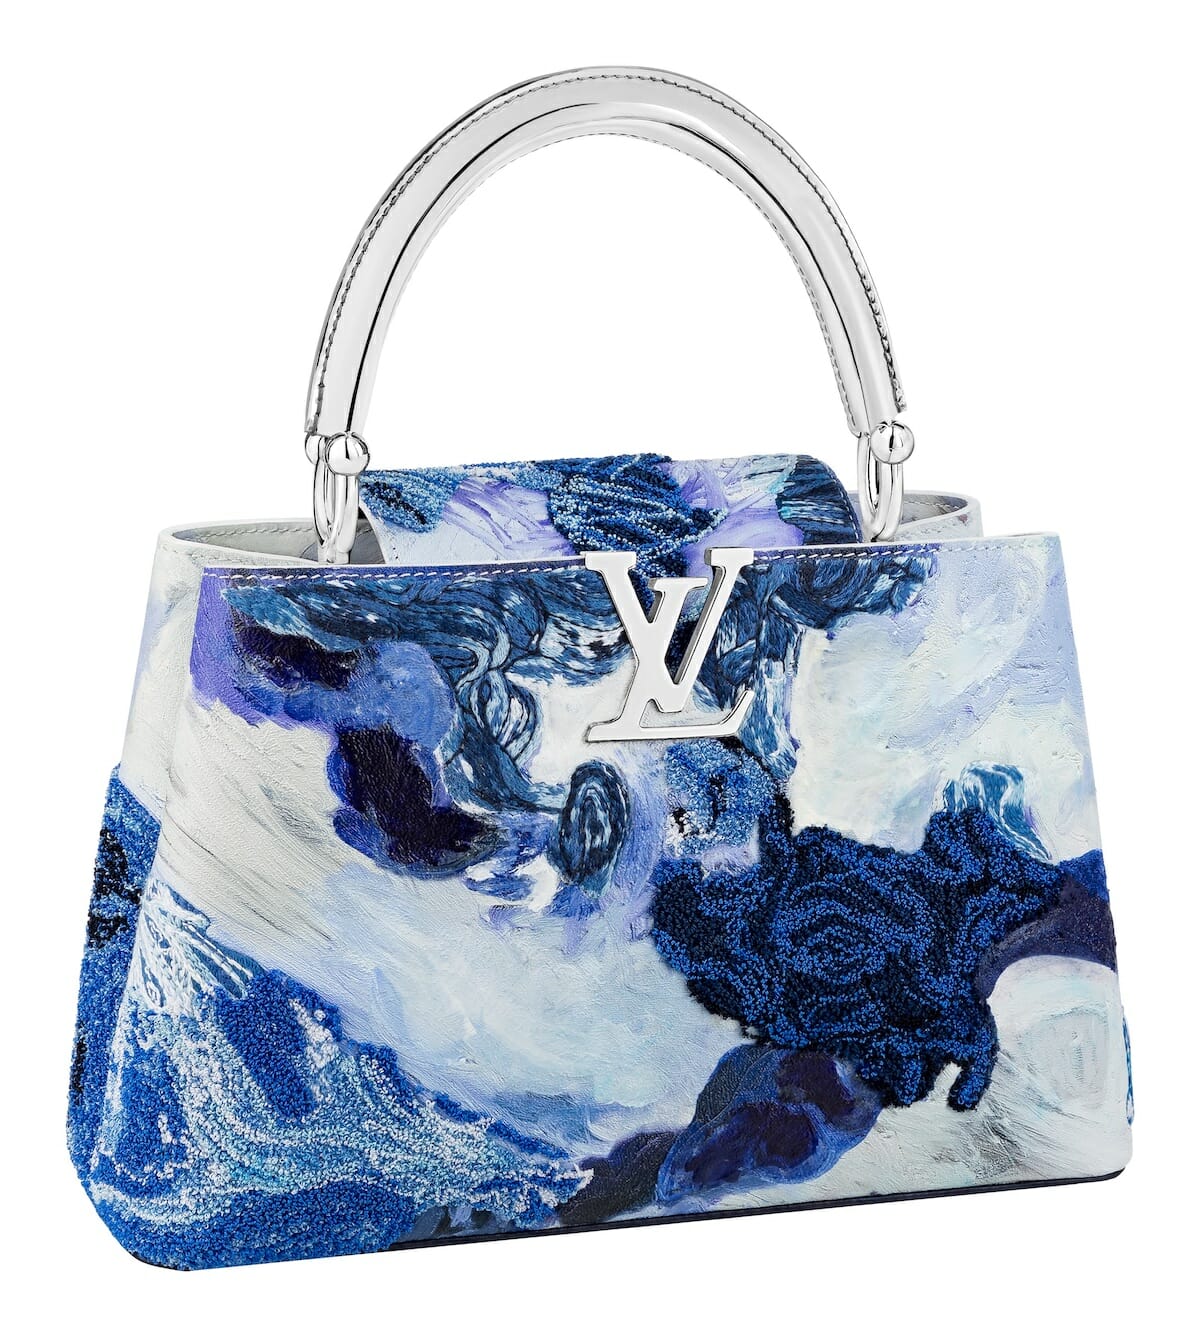 View the Penultimate Collection of Louis Vuitton's Late Artistic